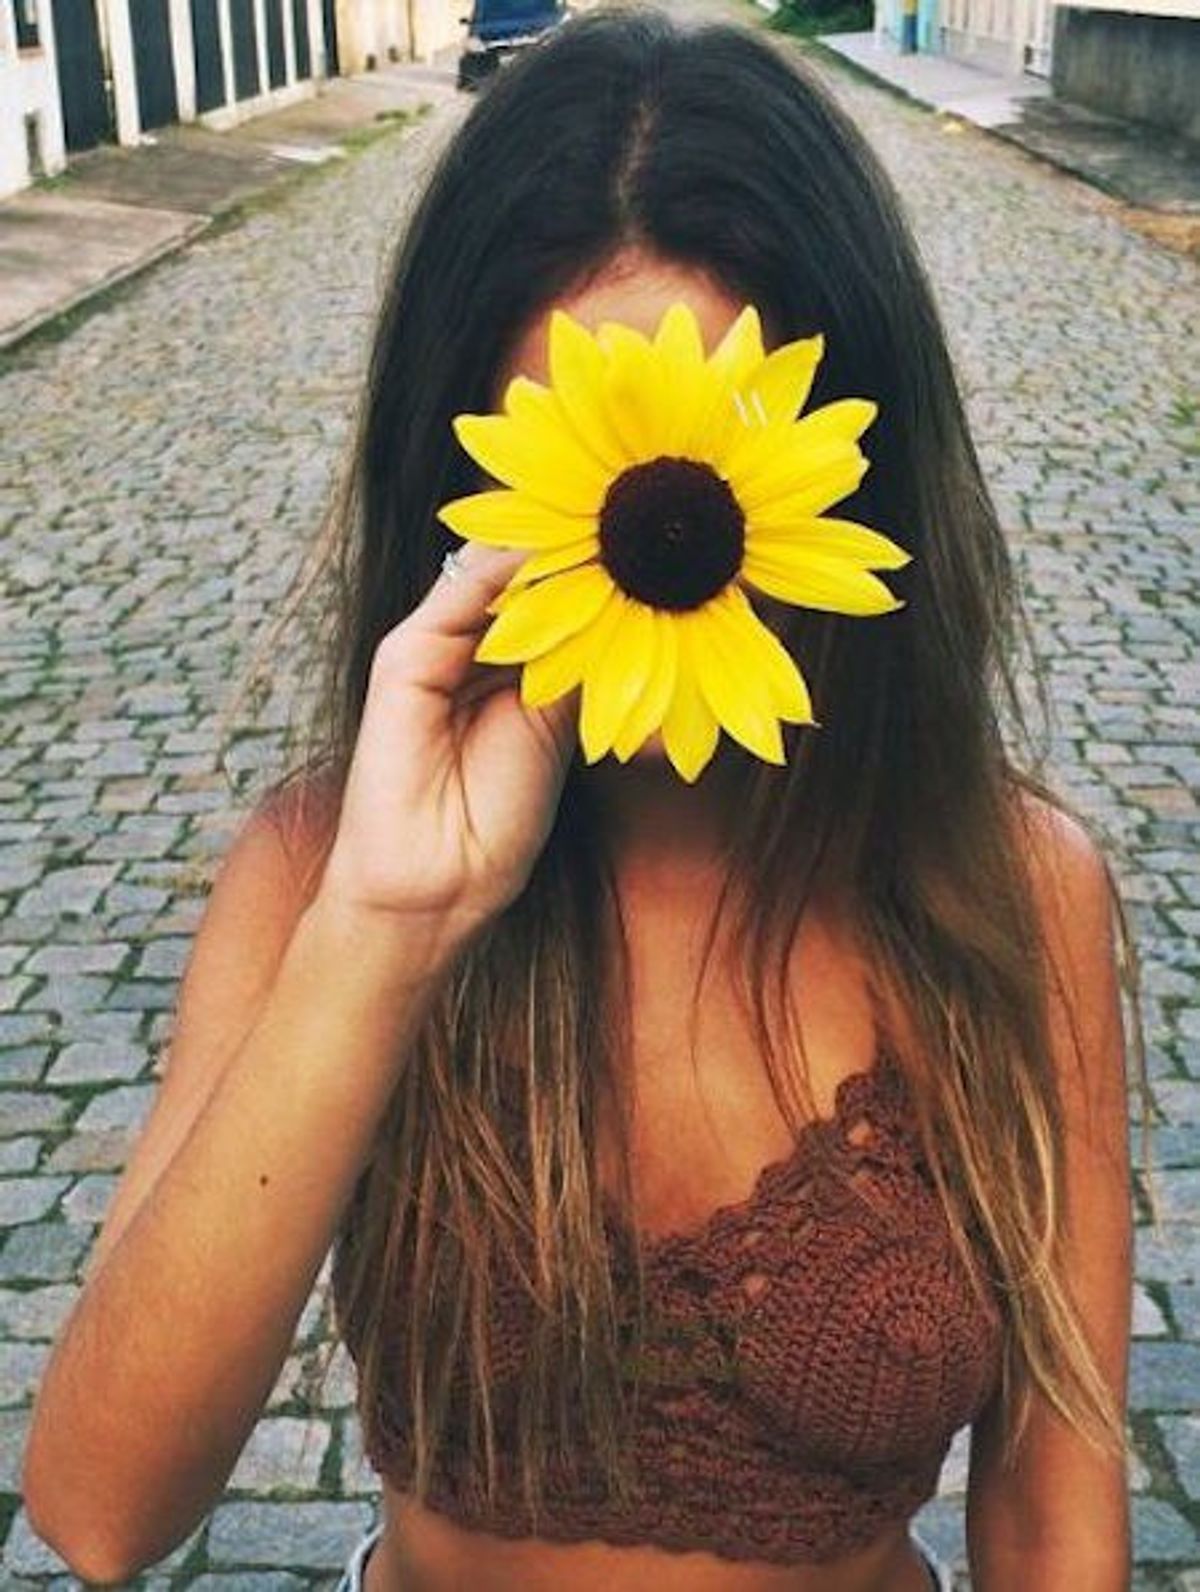 13 Activities You'll Catch Introverts Doing This Summer